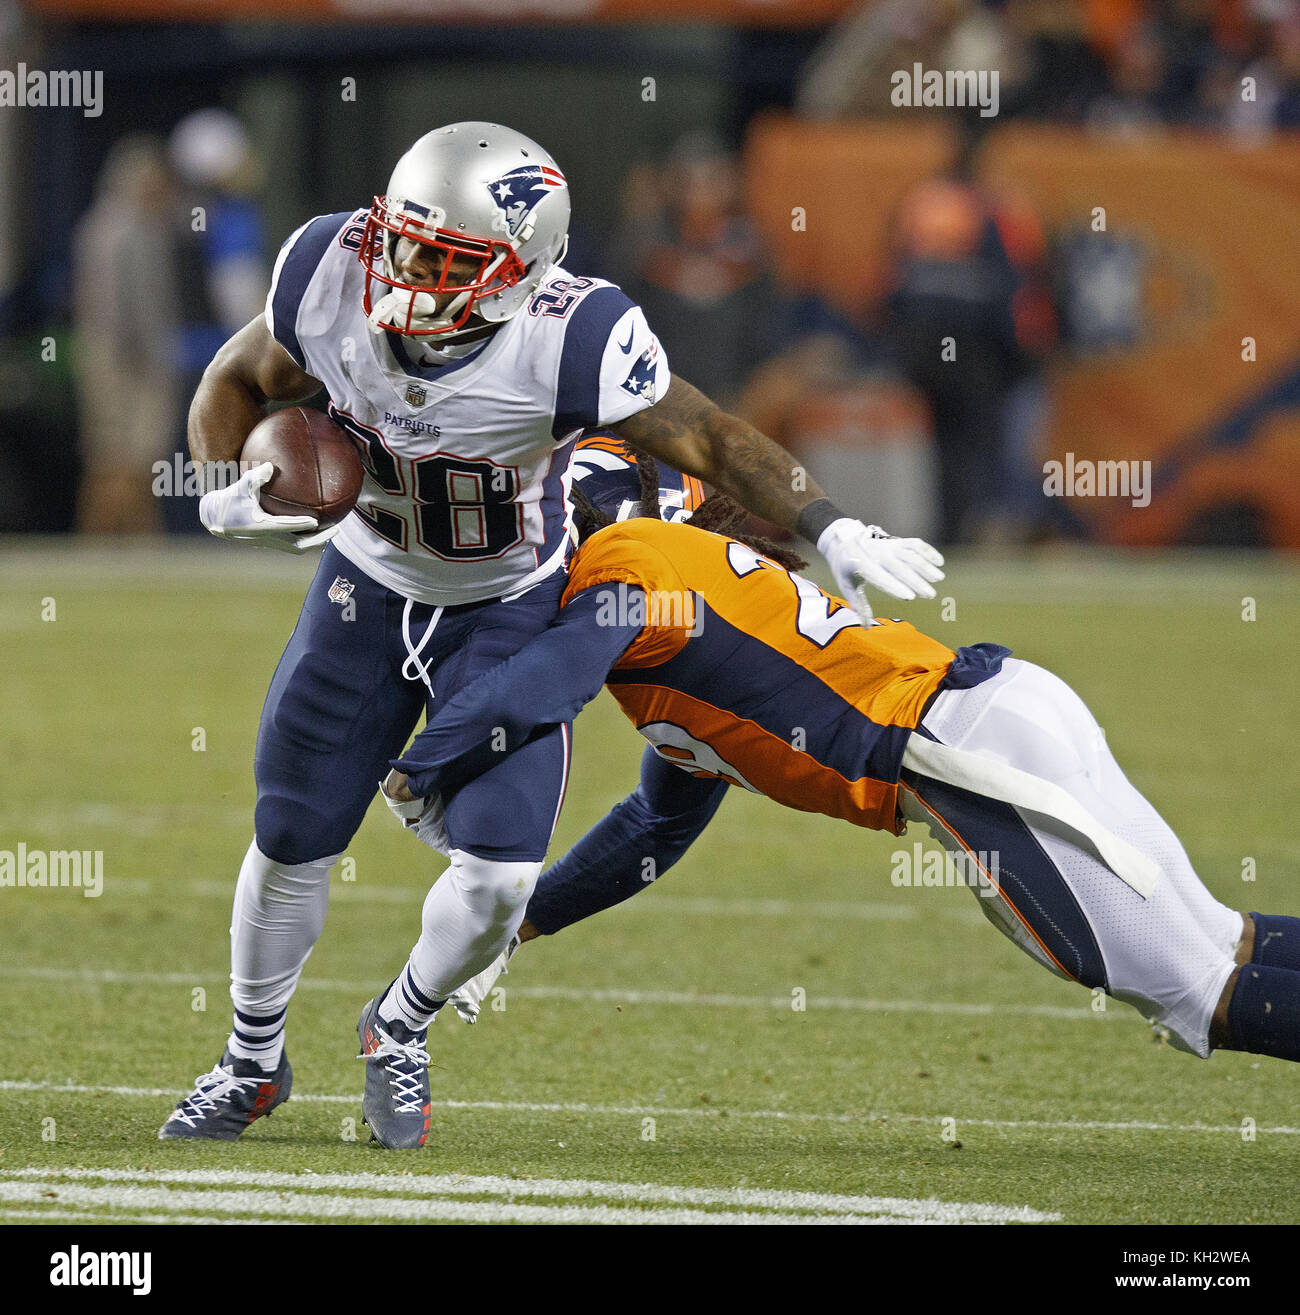 Denver, Colorado, USA. 12th Nov, 2017. Patriots RB JAMES WHITE, left, gets tackled by Broncos CB BRADLEY ROBY, right, during the 2nd. half at Sports Authority Field at Mile High Sunday night in Denver, CO. The Patriots beat the Broncos 41-16. Credit: Hector Acevedo/ZUMA Wire/Alamy Live News Stock Photo